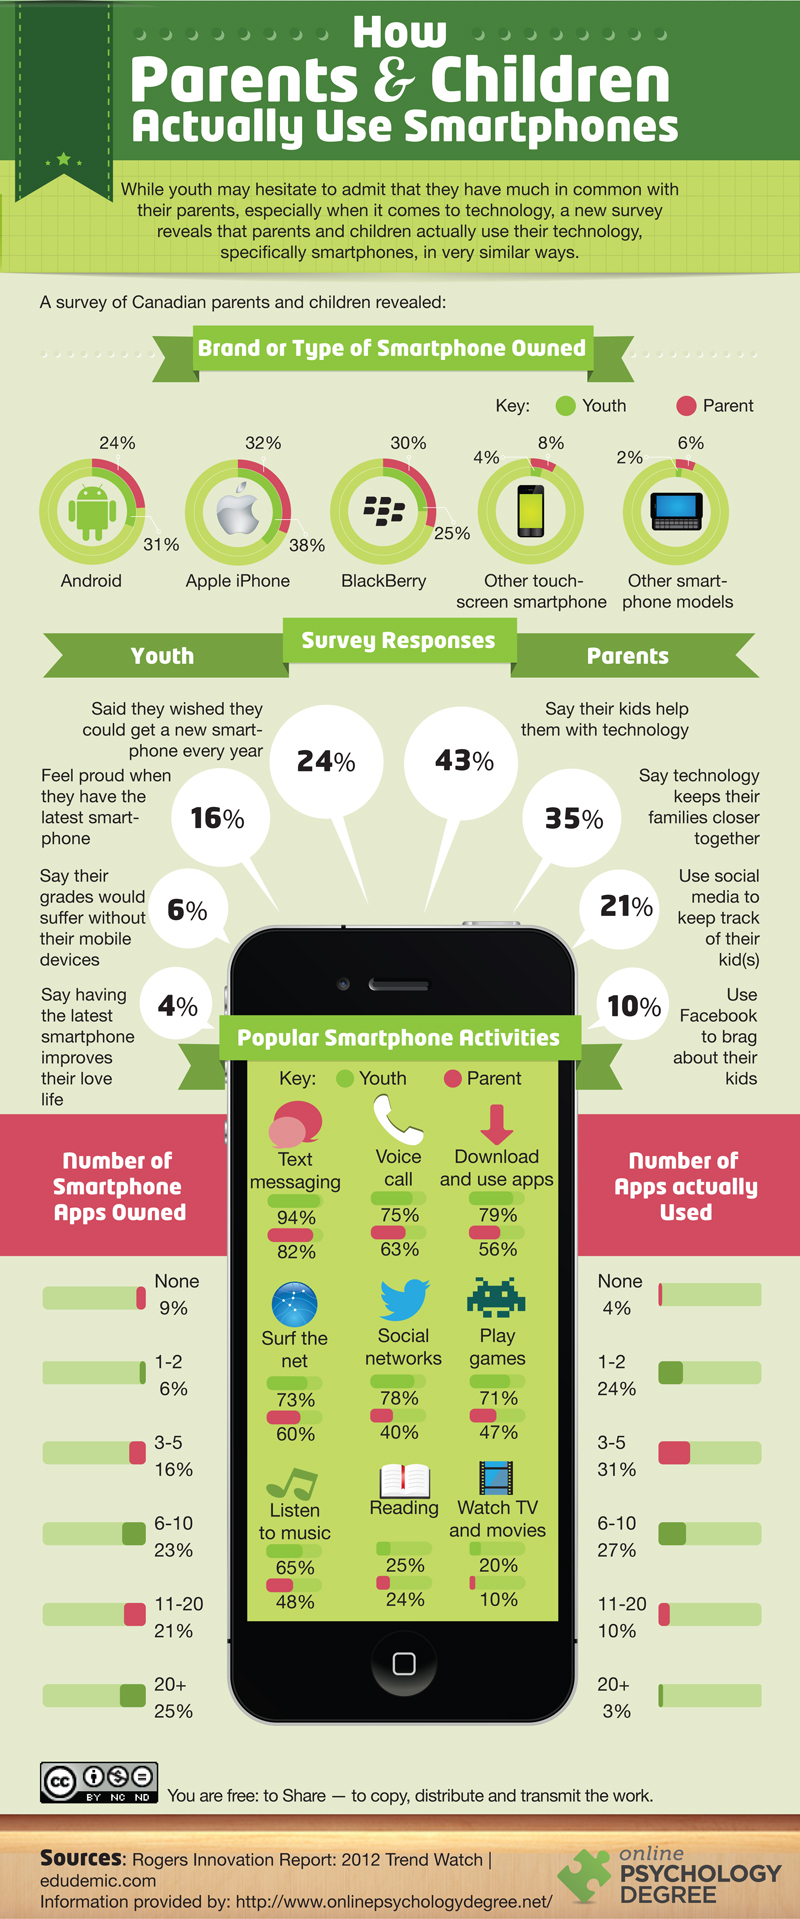 How do Parents and Children actually use their Smart Phones?